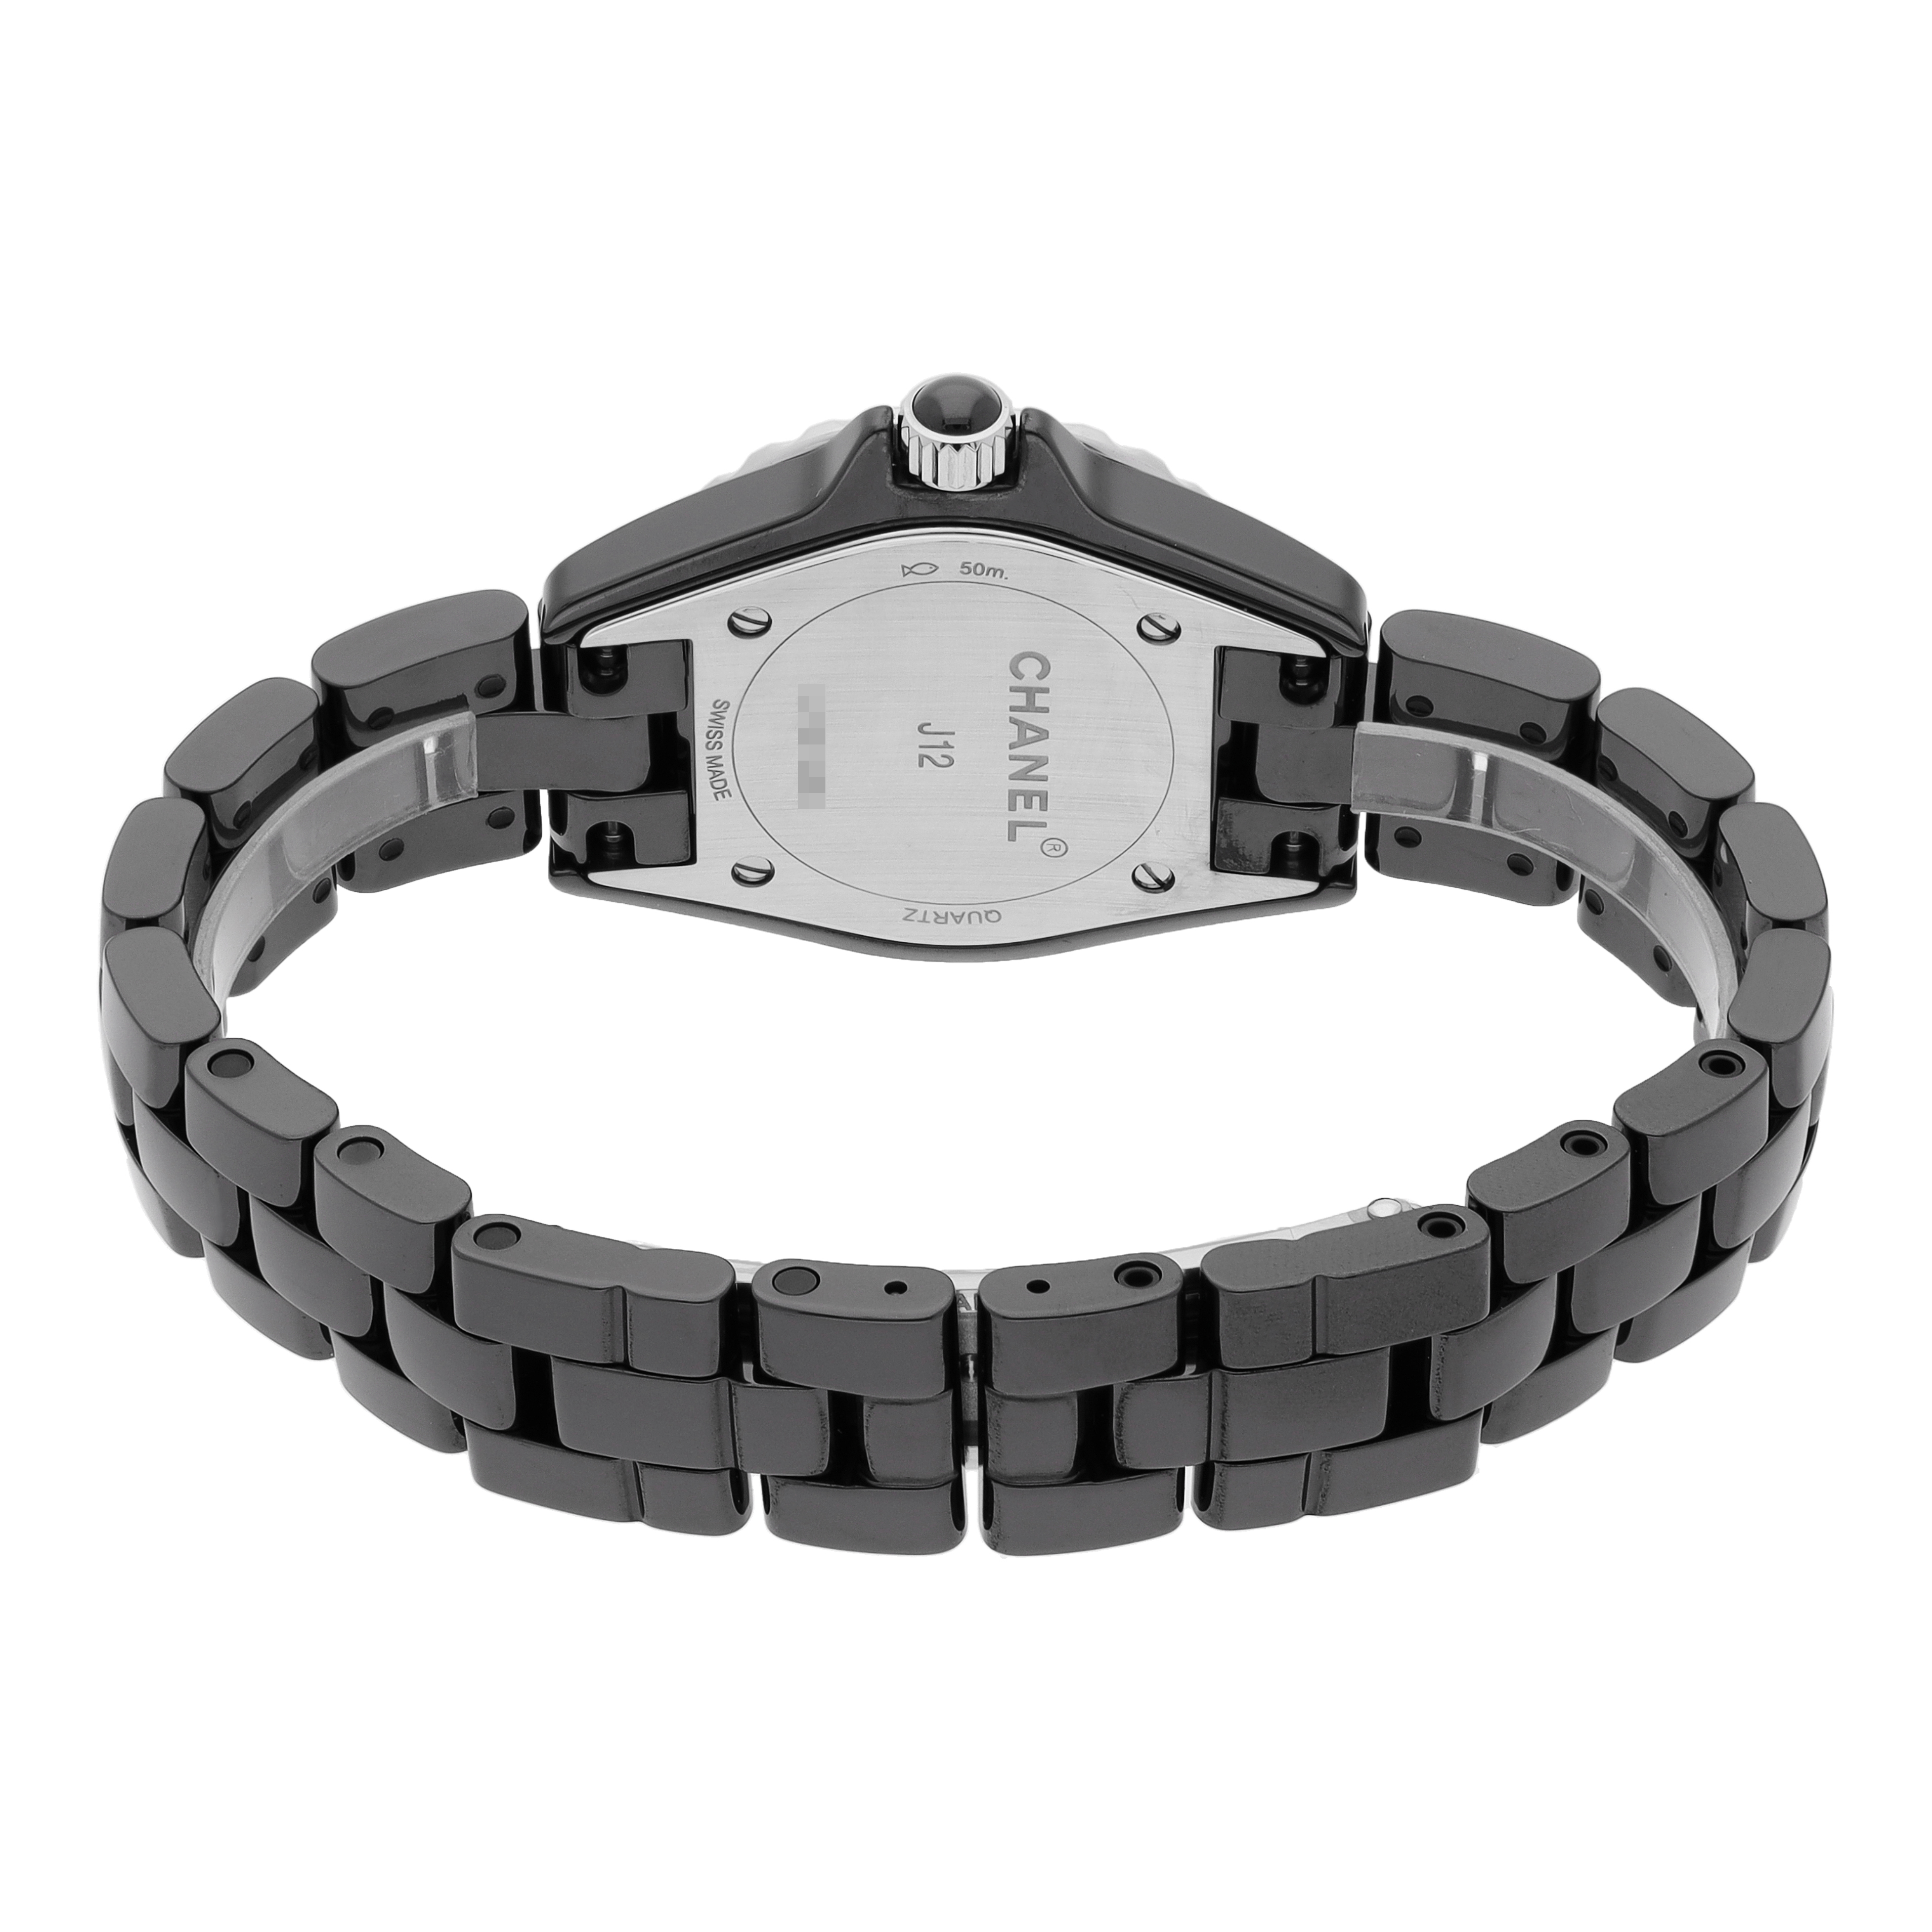 Chanel J12 Reference H0940, A Black Ceramic and Stainless Steel Wristwatch with Chronograph and Date, Mens Watch